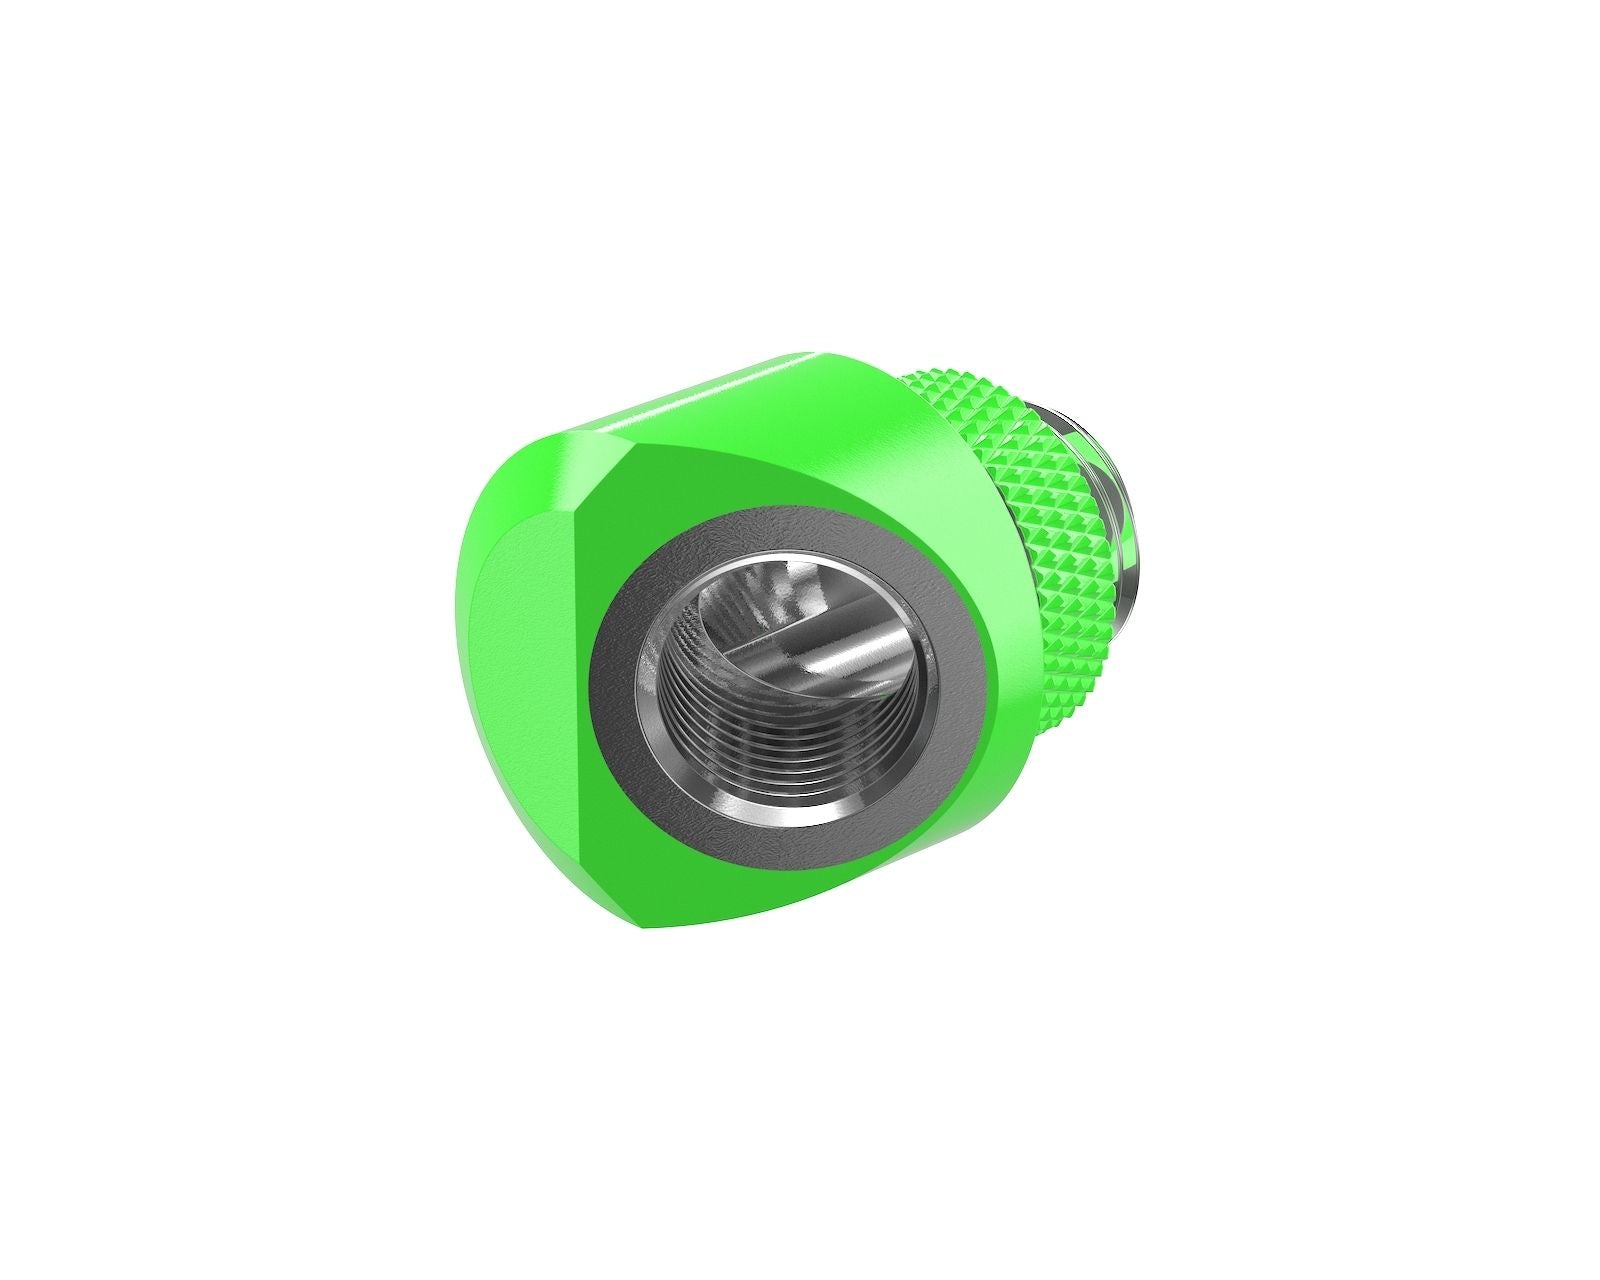 PrimoChill InterConnectSX Flat 45 Degree Rotary Fitting (FAF45) – Enhanced PC Cooling with Sleek Aesthetics - Available in 20+ Colors, Custom Watercooling Loop Ready - UV Green